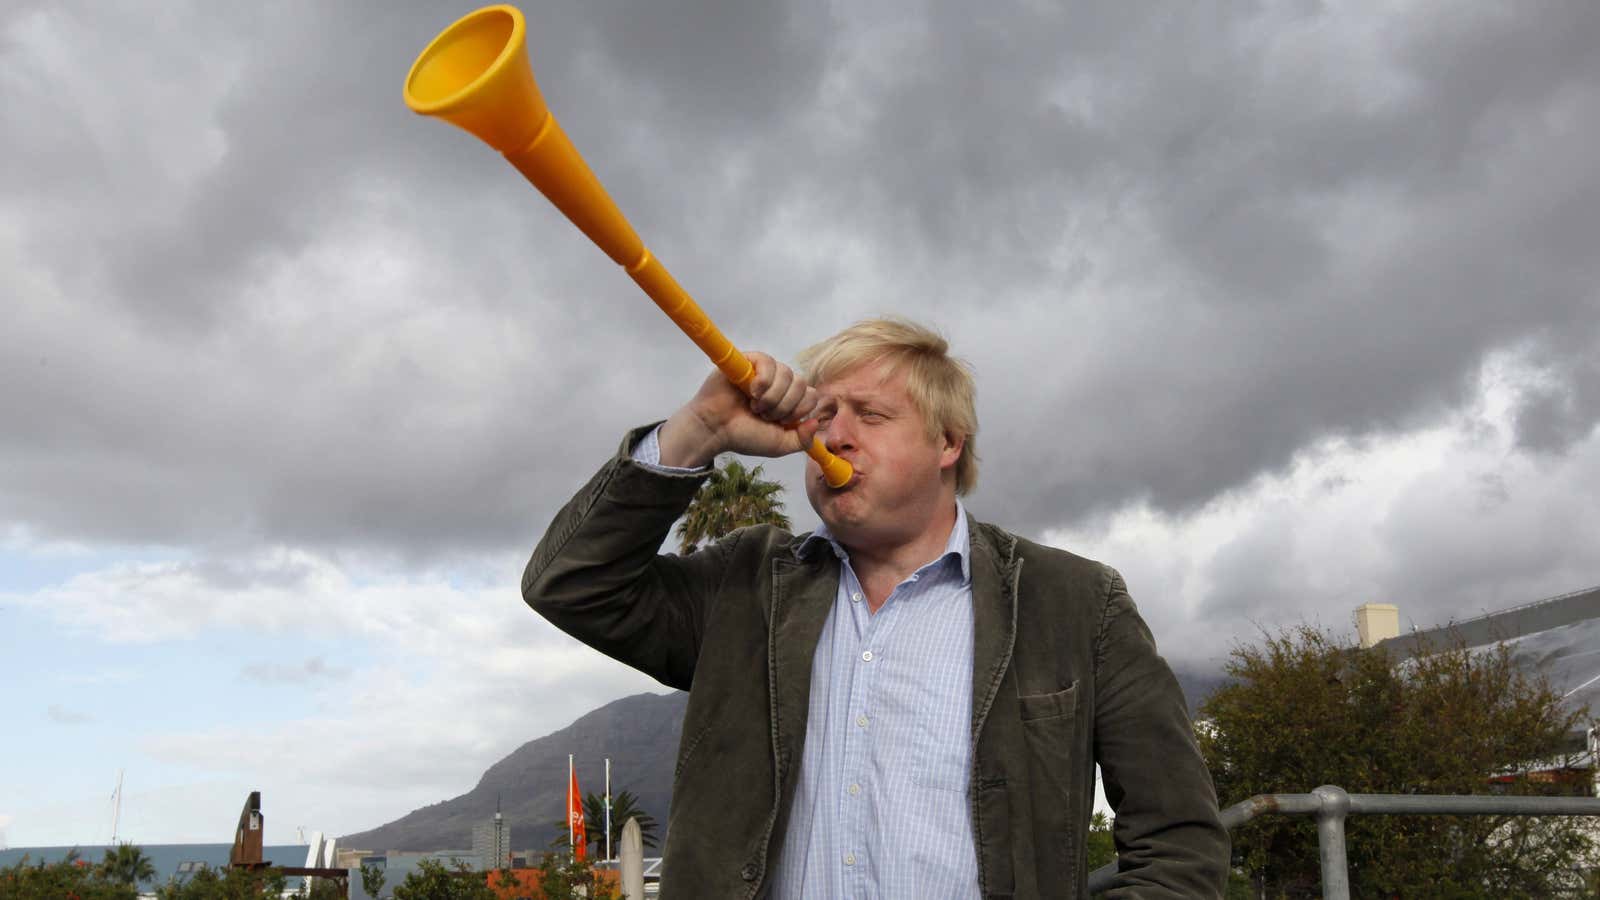 Boris Johnson blows a vuvuzela during his a visit as London mayor to Cape Town in 2010.